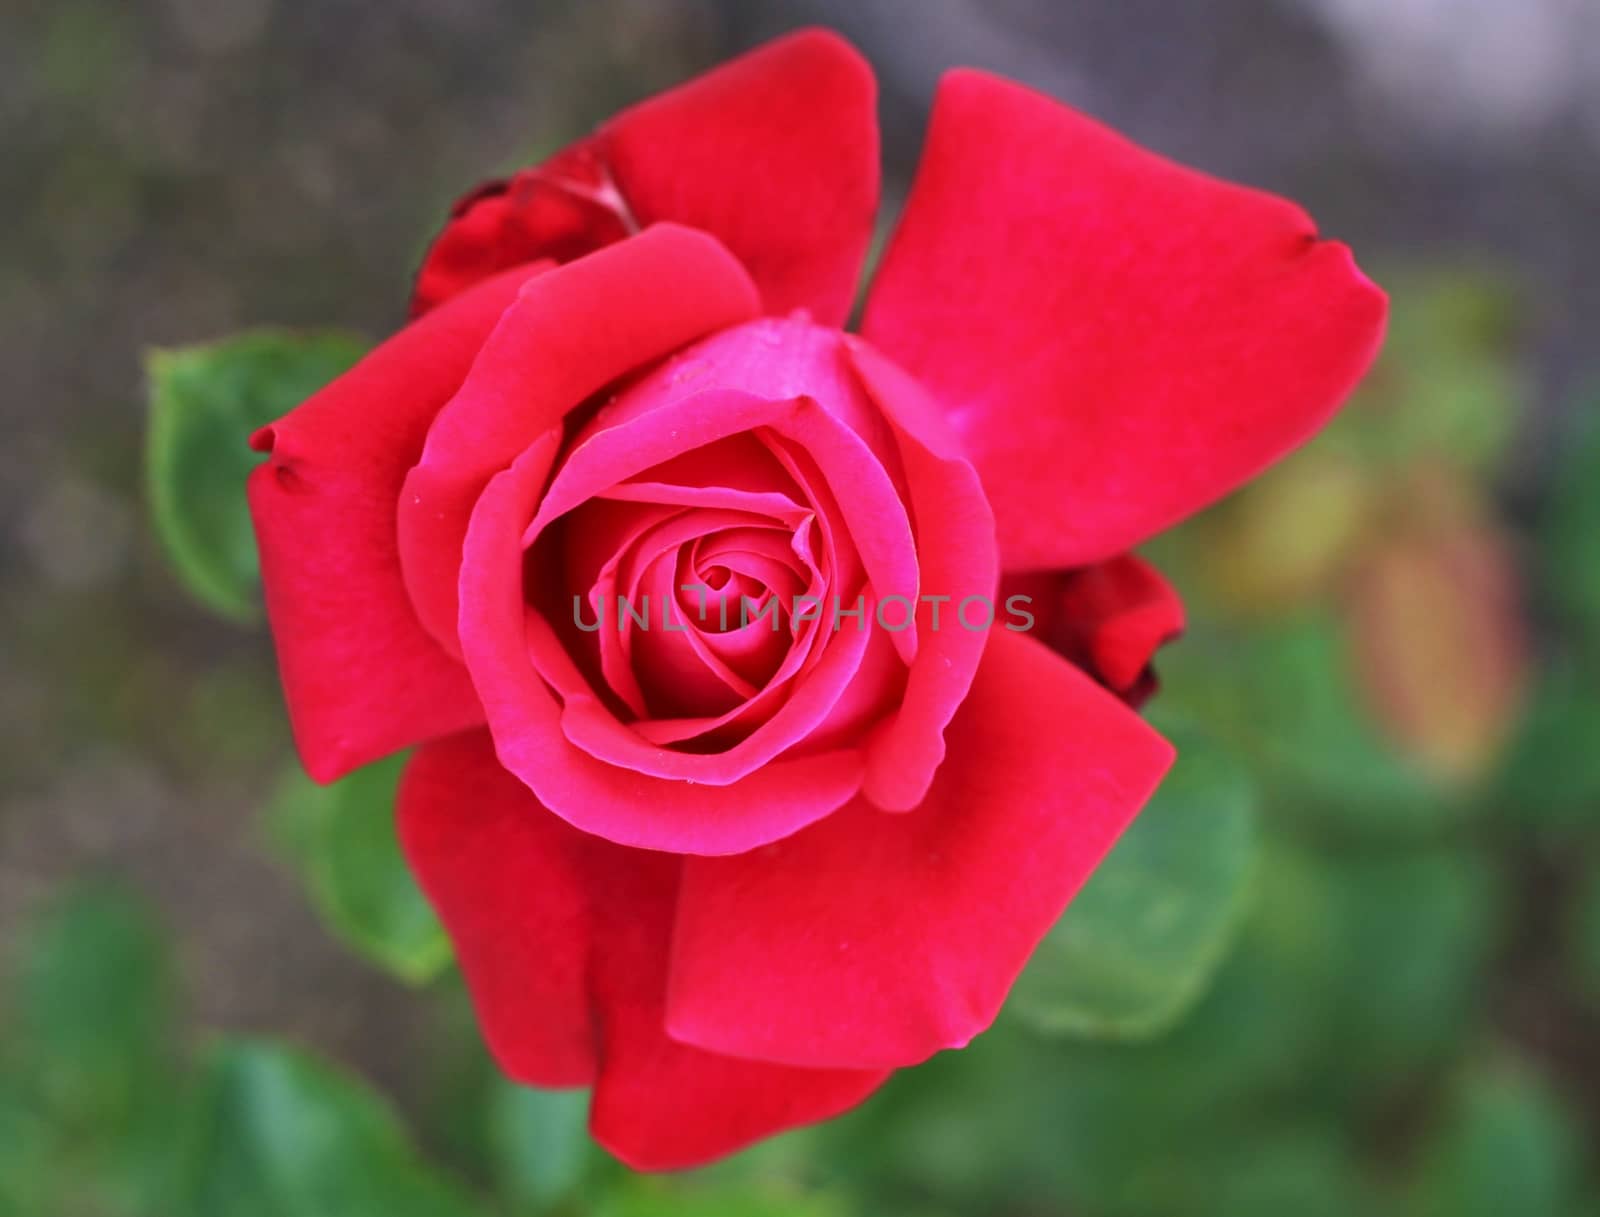 Red rose in the garden by jnerad